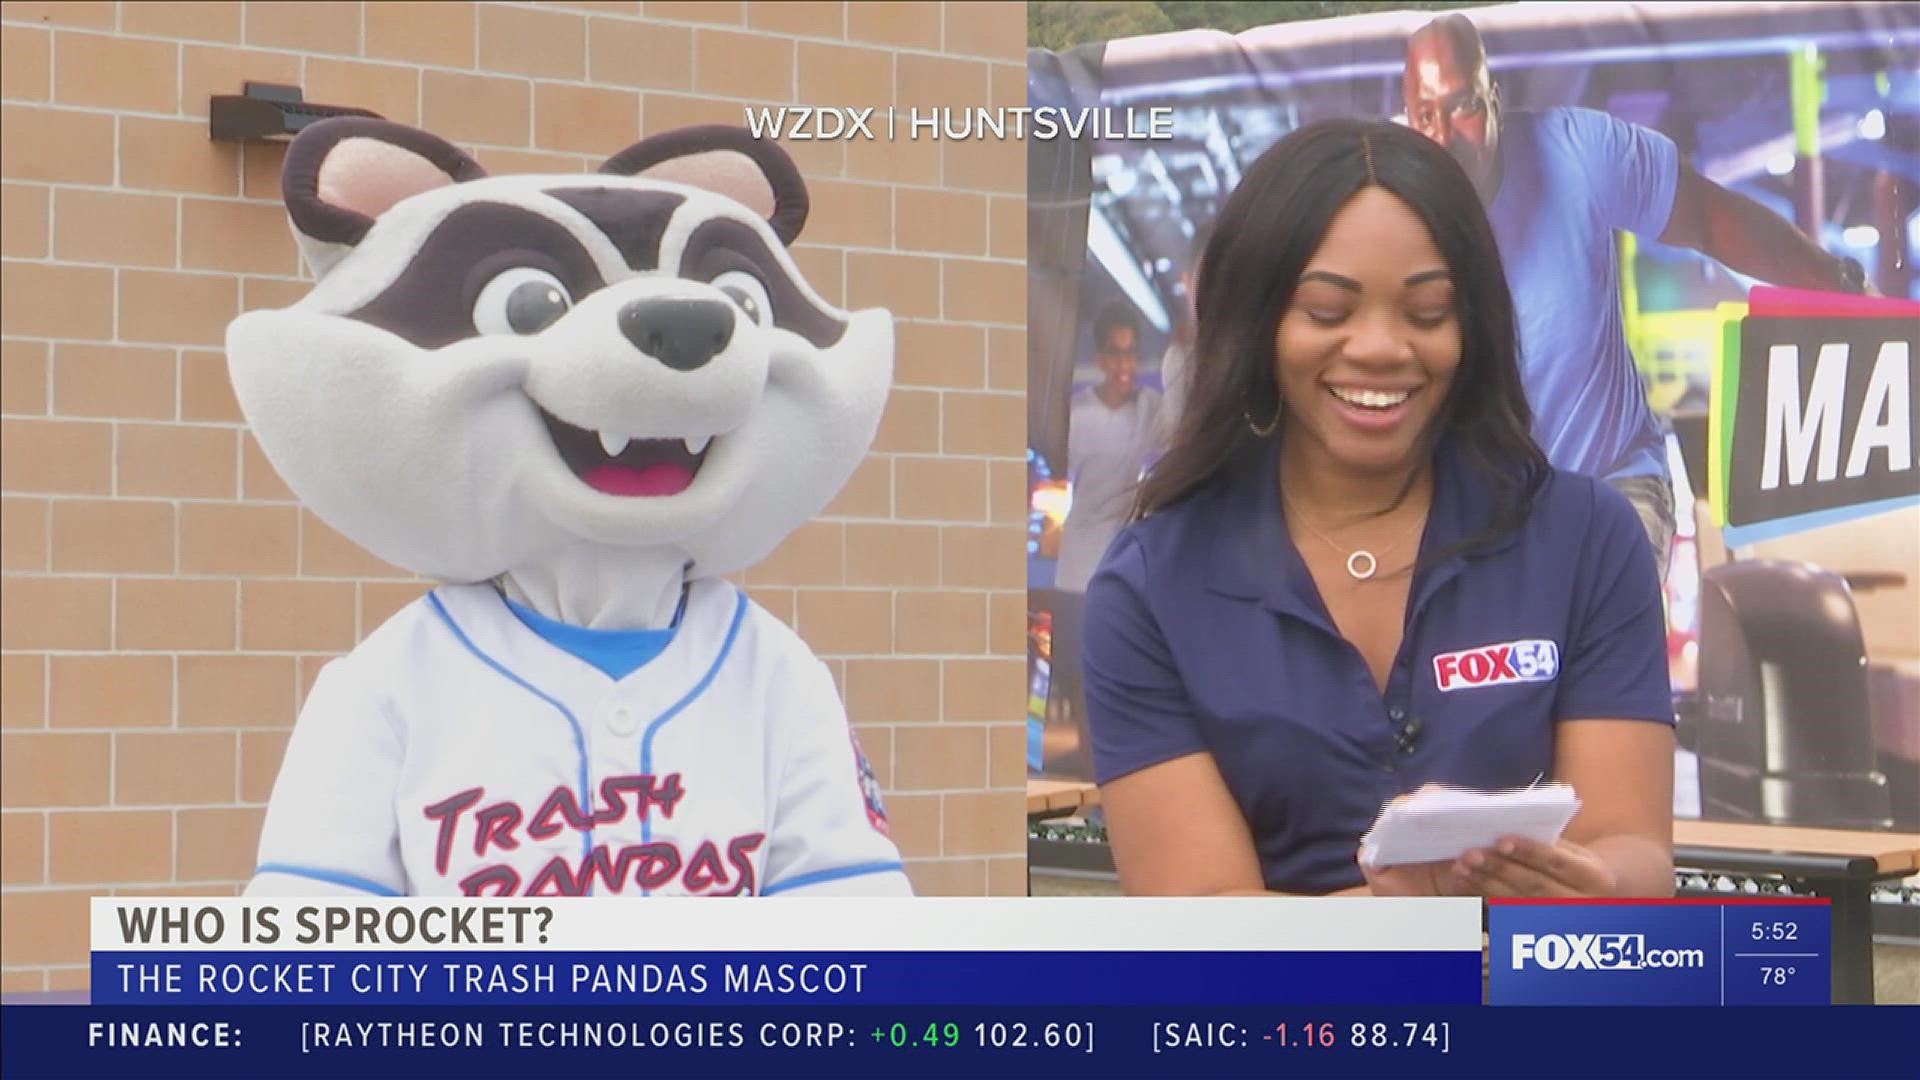 Sprocket is more than a mascot he is a major part of the Rocket City Trash Pandas organization.